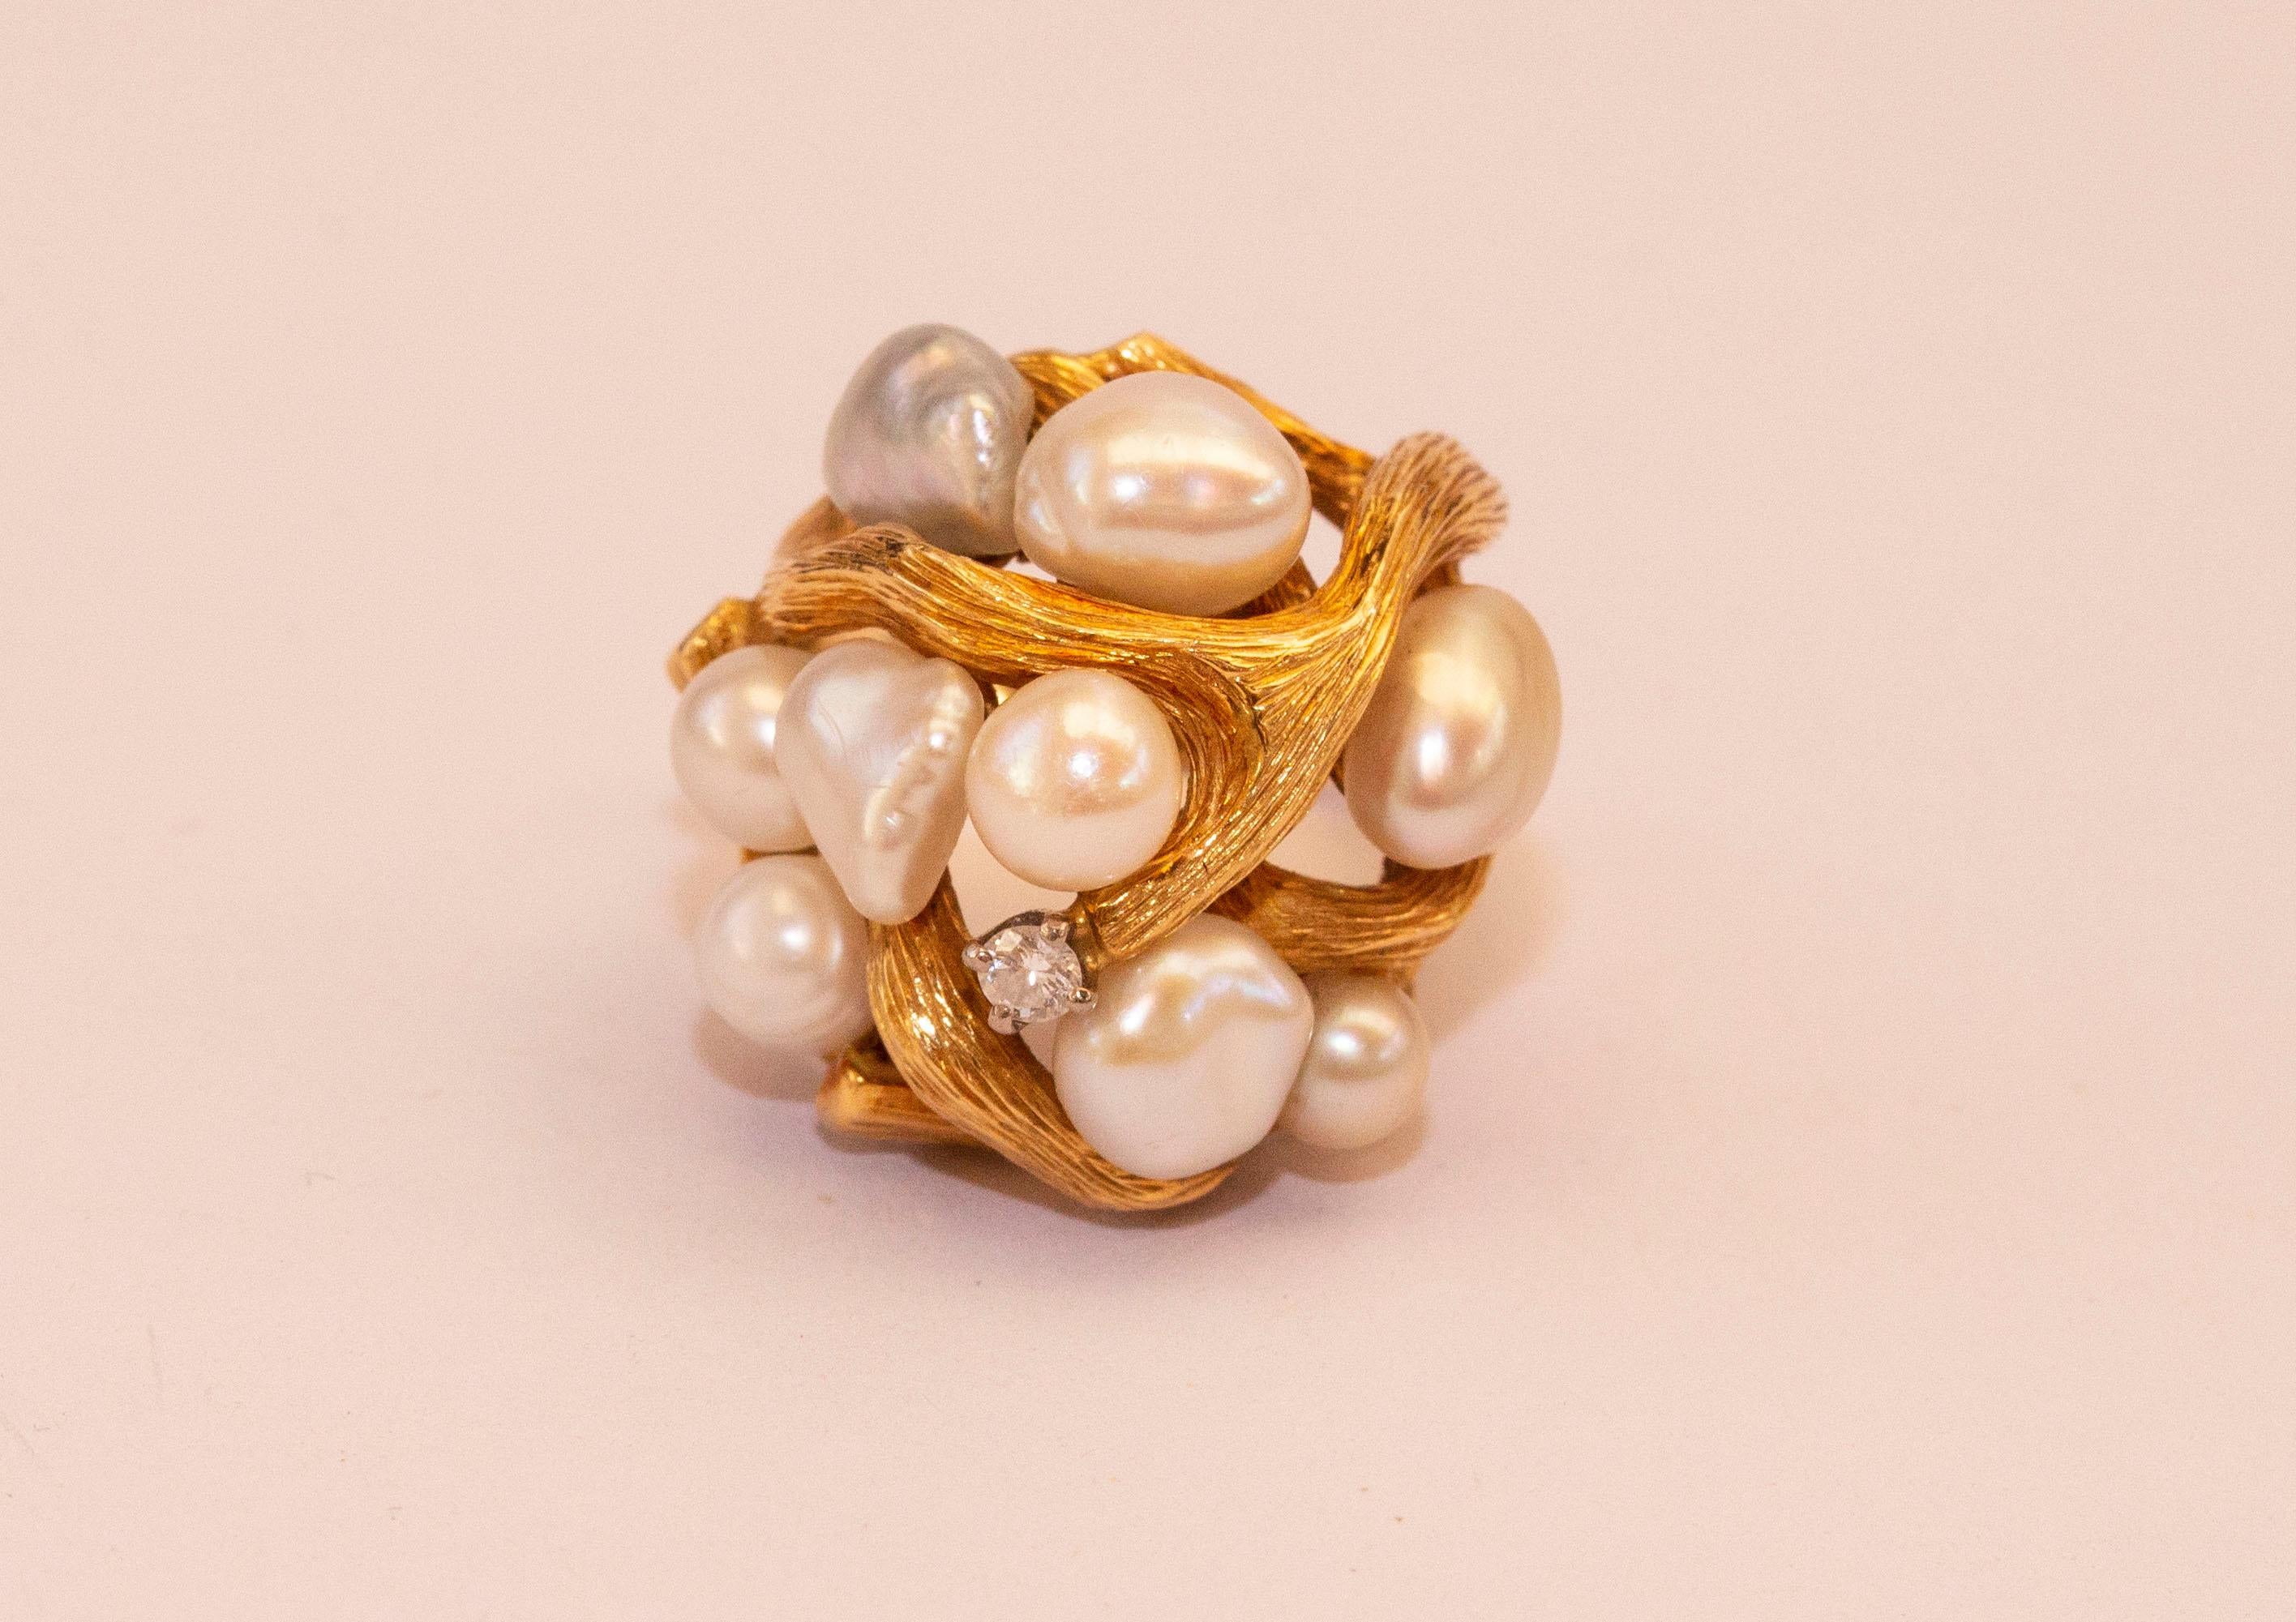 18 Karat Yellow Gold Brutalist Organic Cocktail Ring with Pearls and Diamond For Sale 1